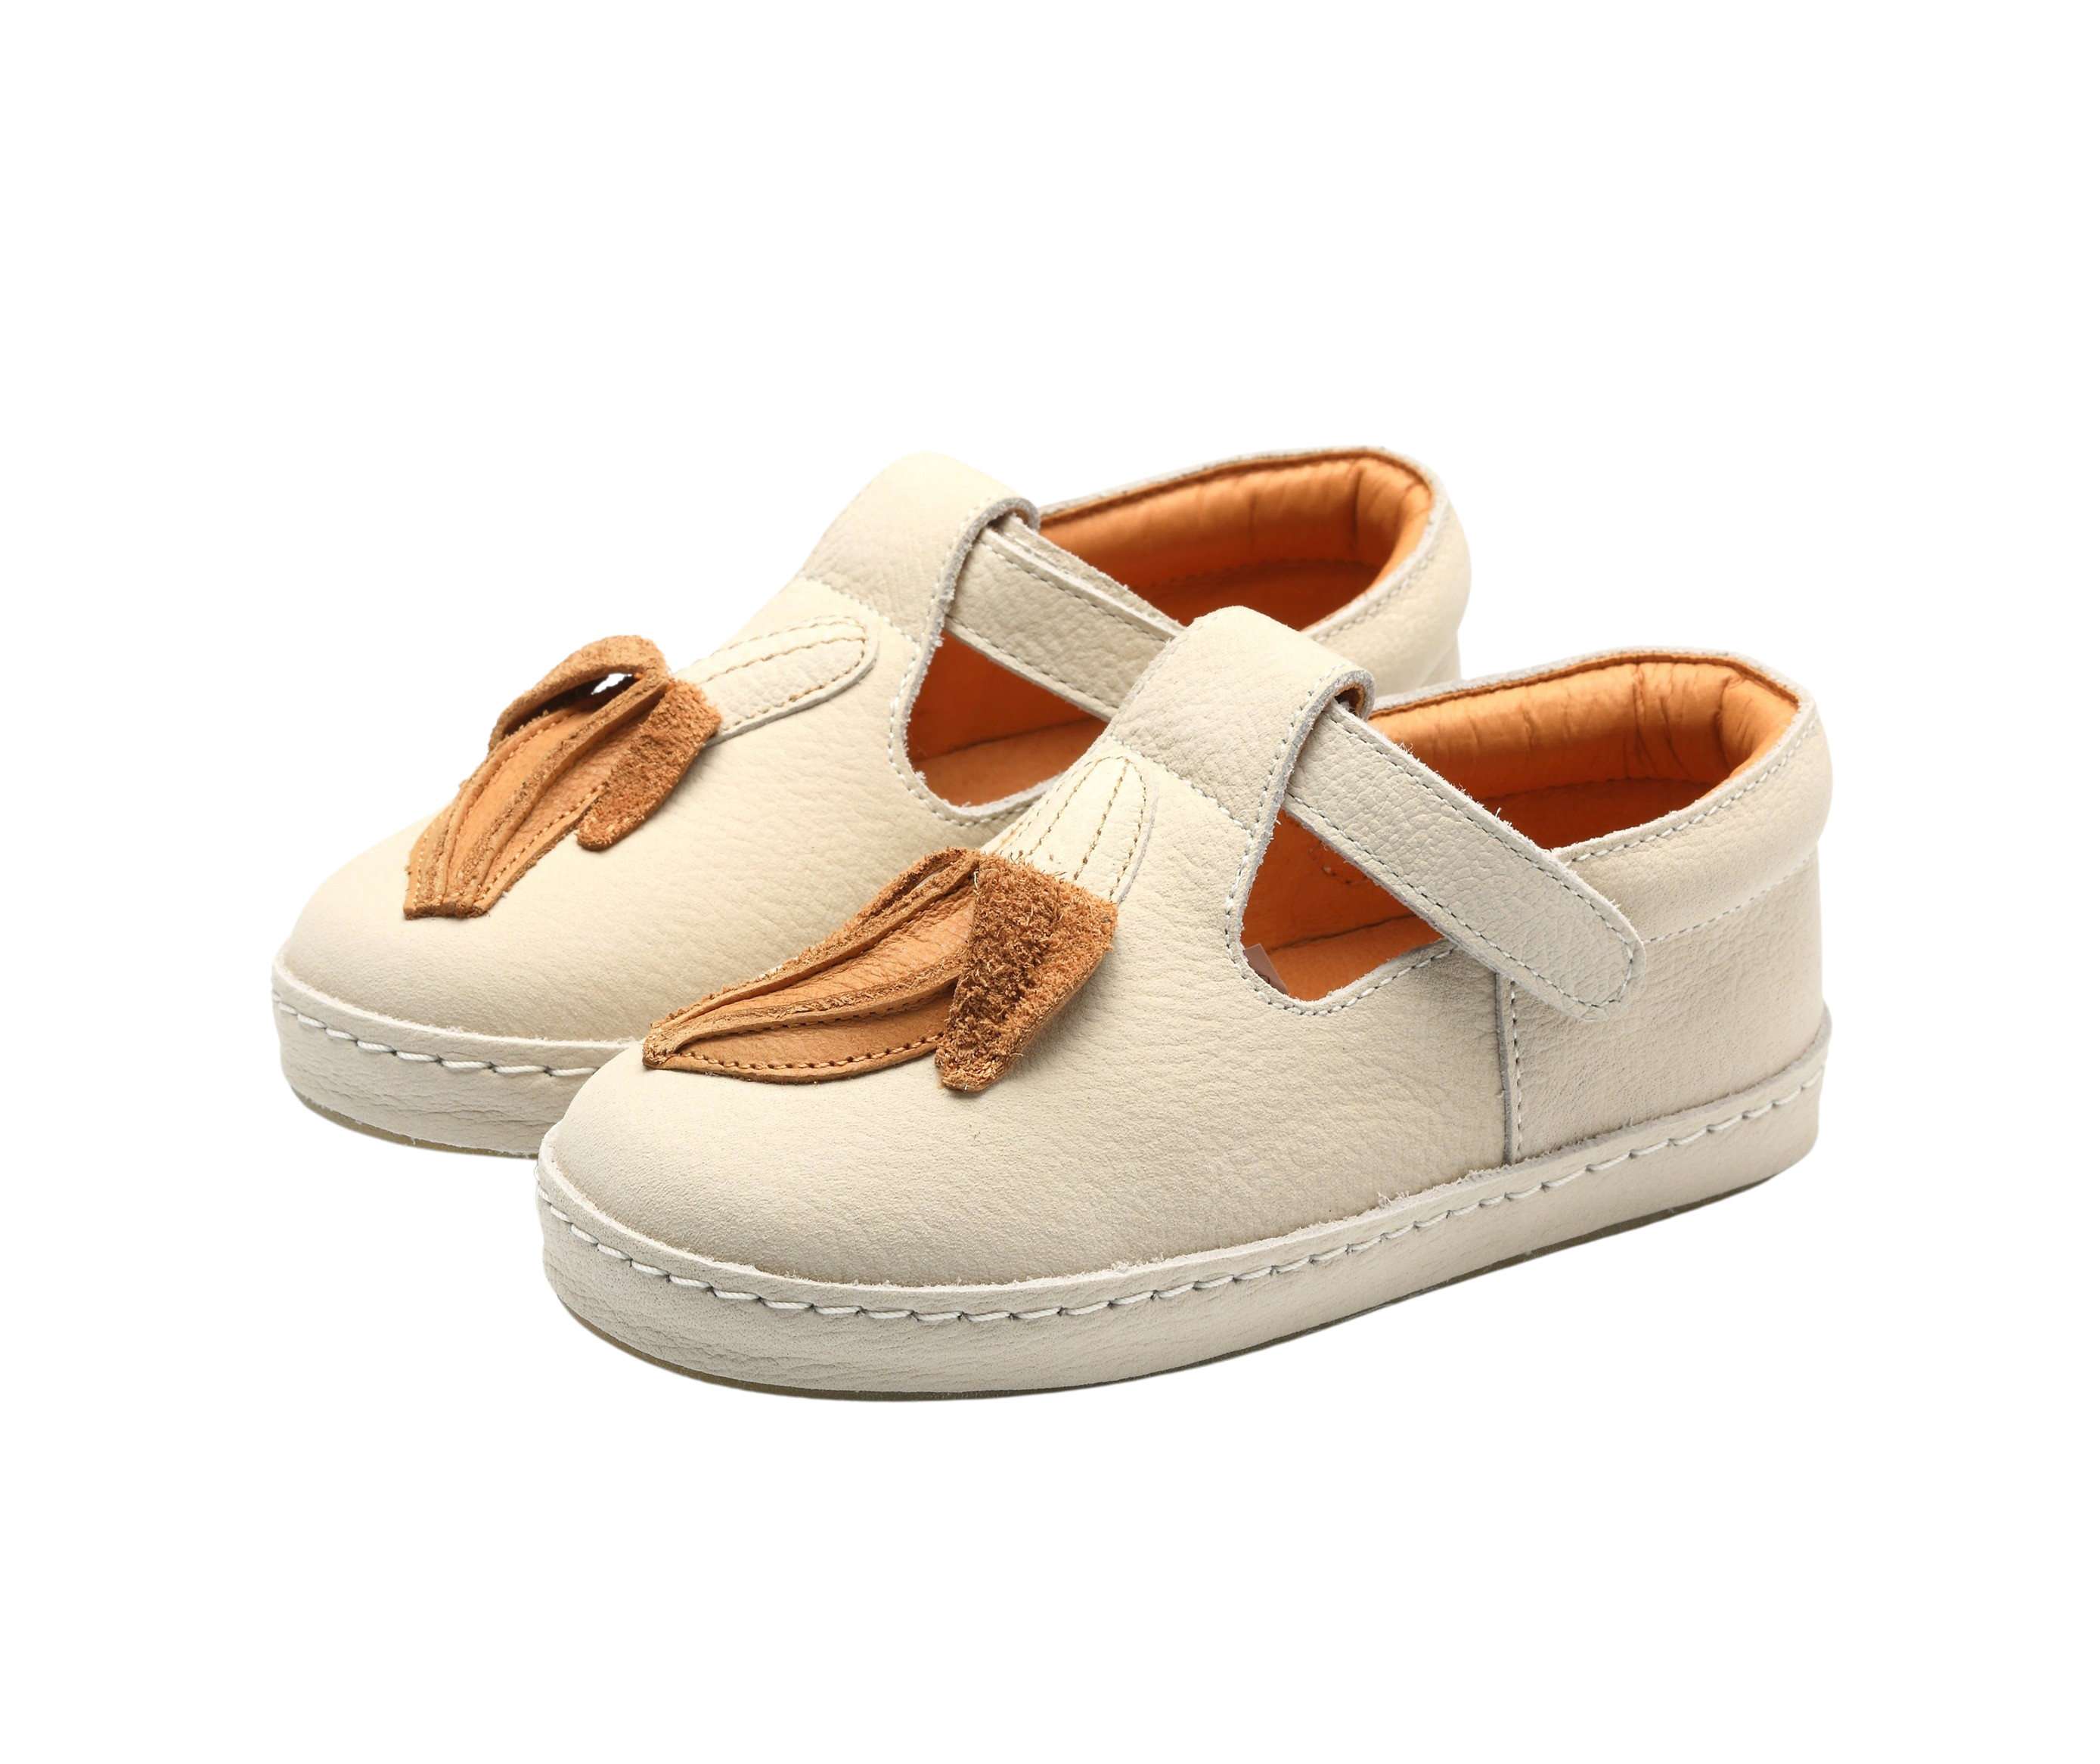 Bowi Shoes | Banana | Cream Betting Leather